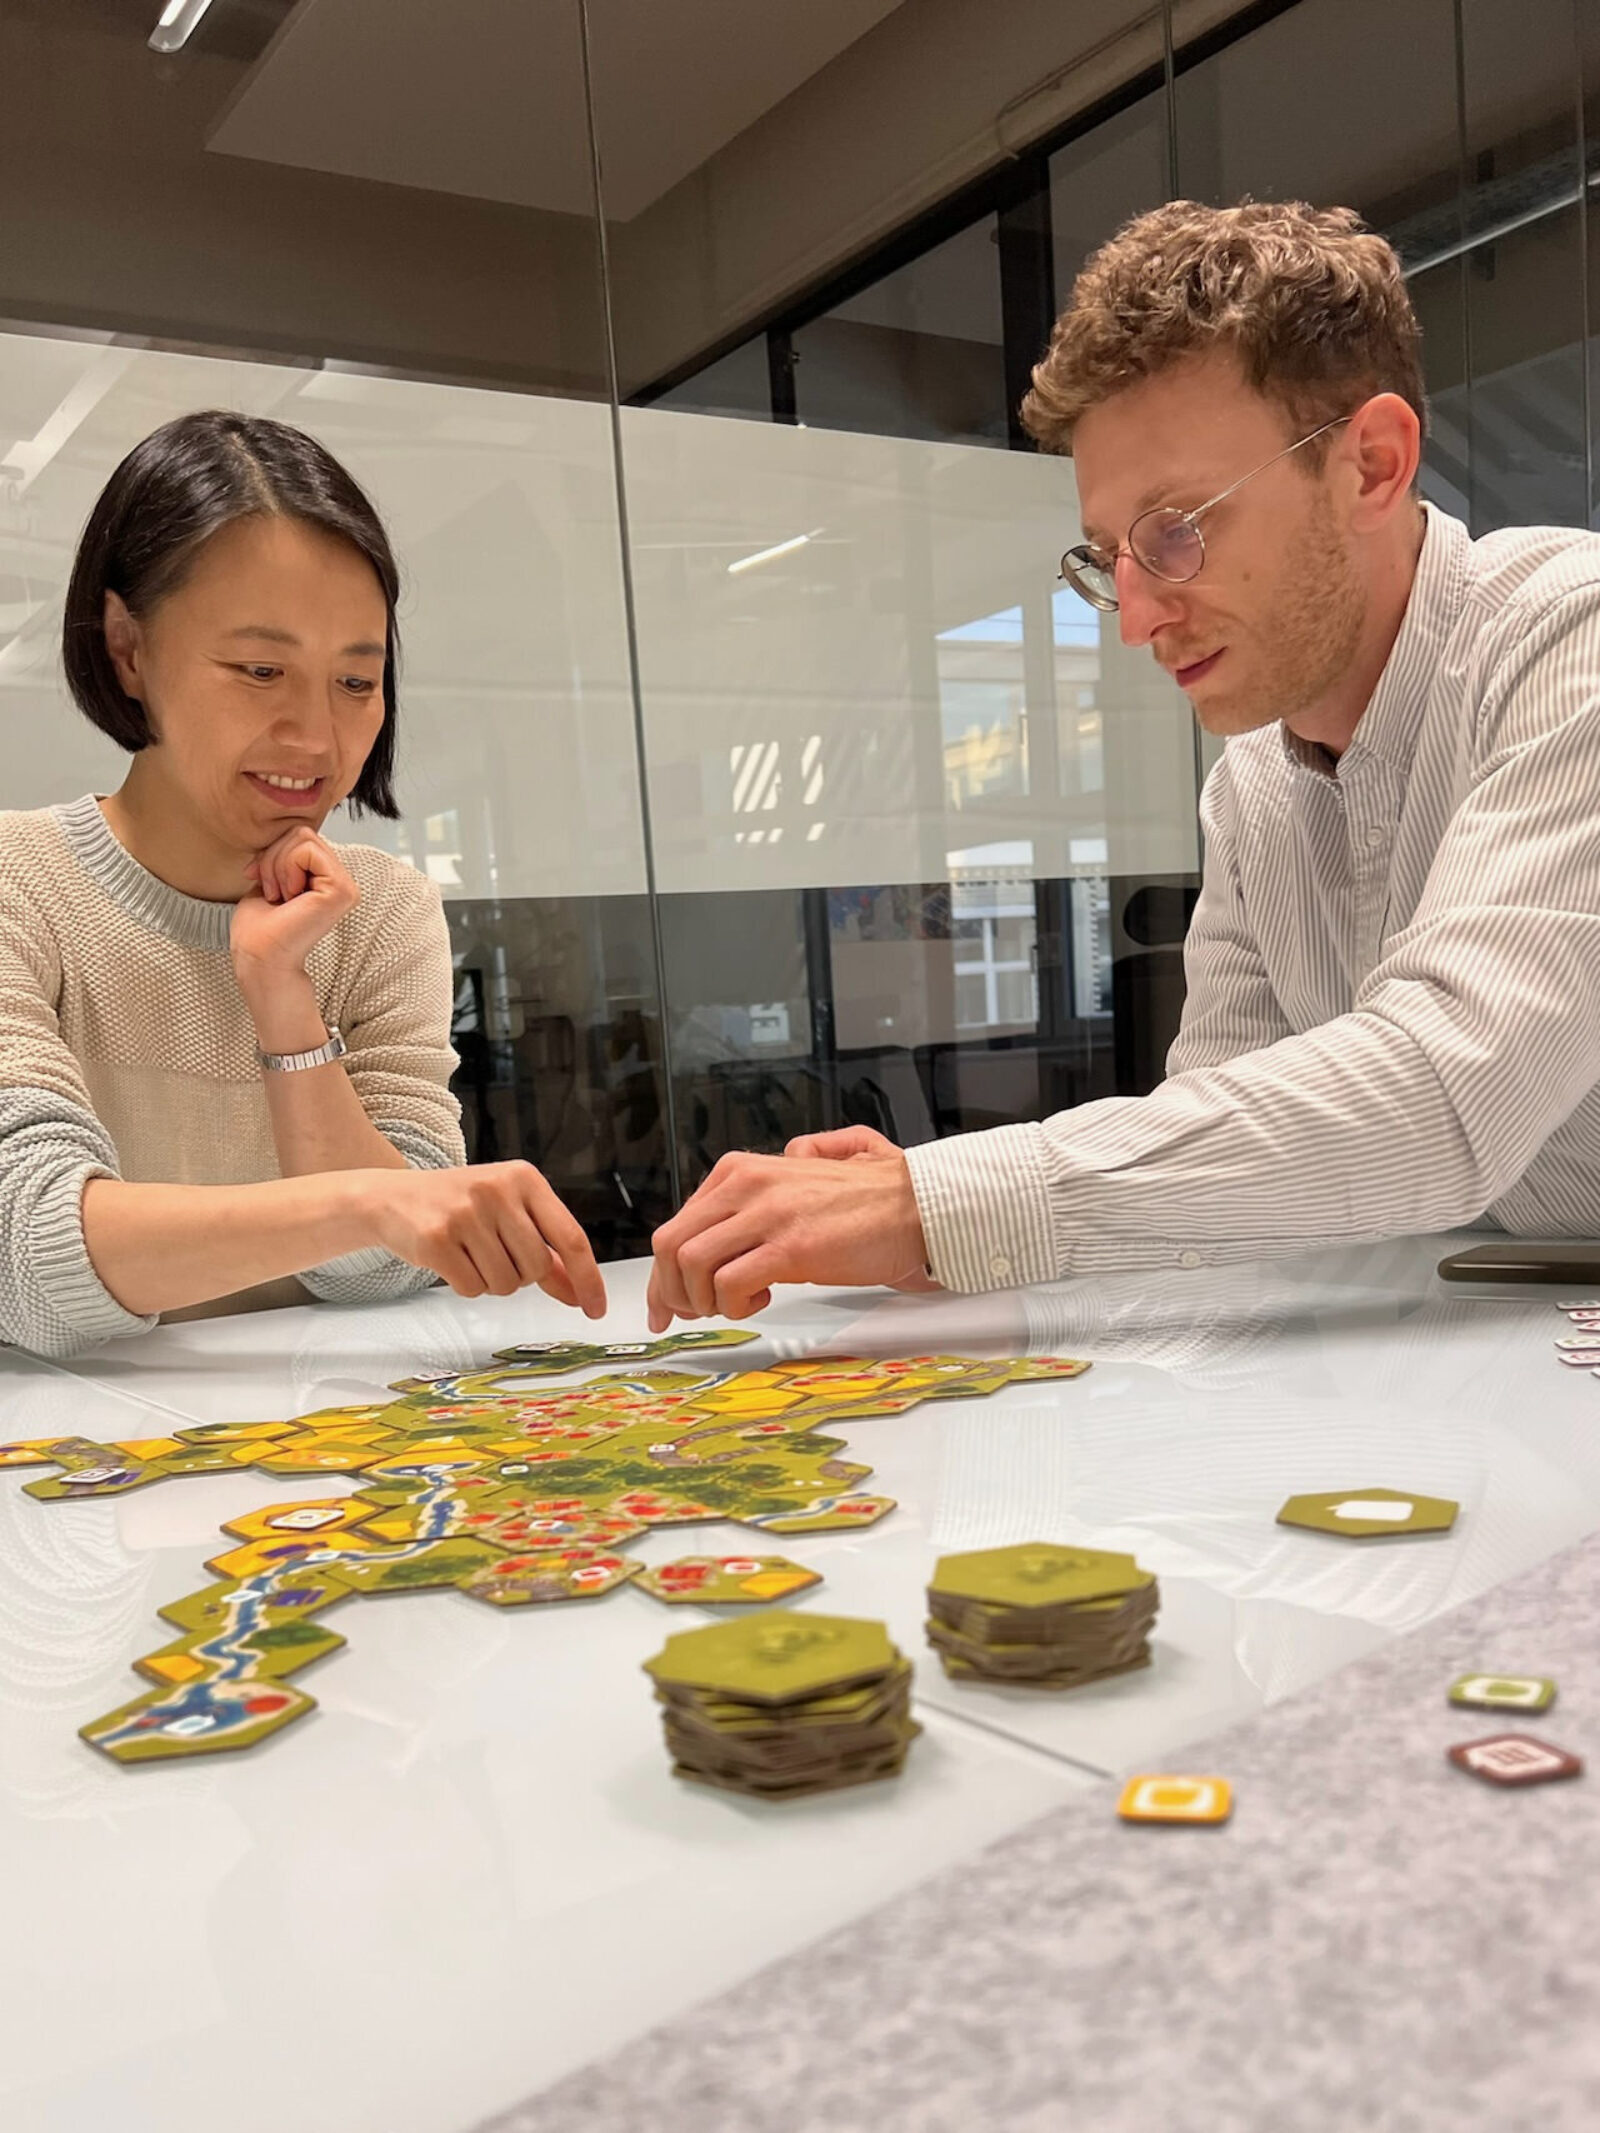 Two of us playing the board game “Dorfromantik” in a meeting room, staring at the game tiles with absolute focus